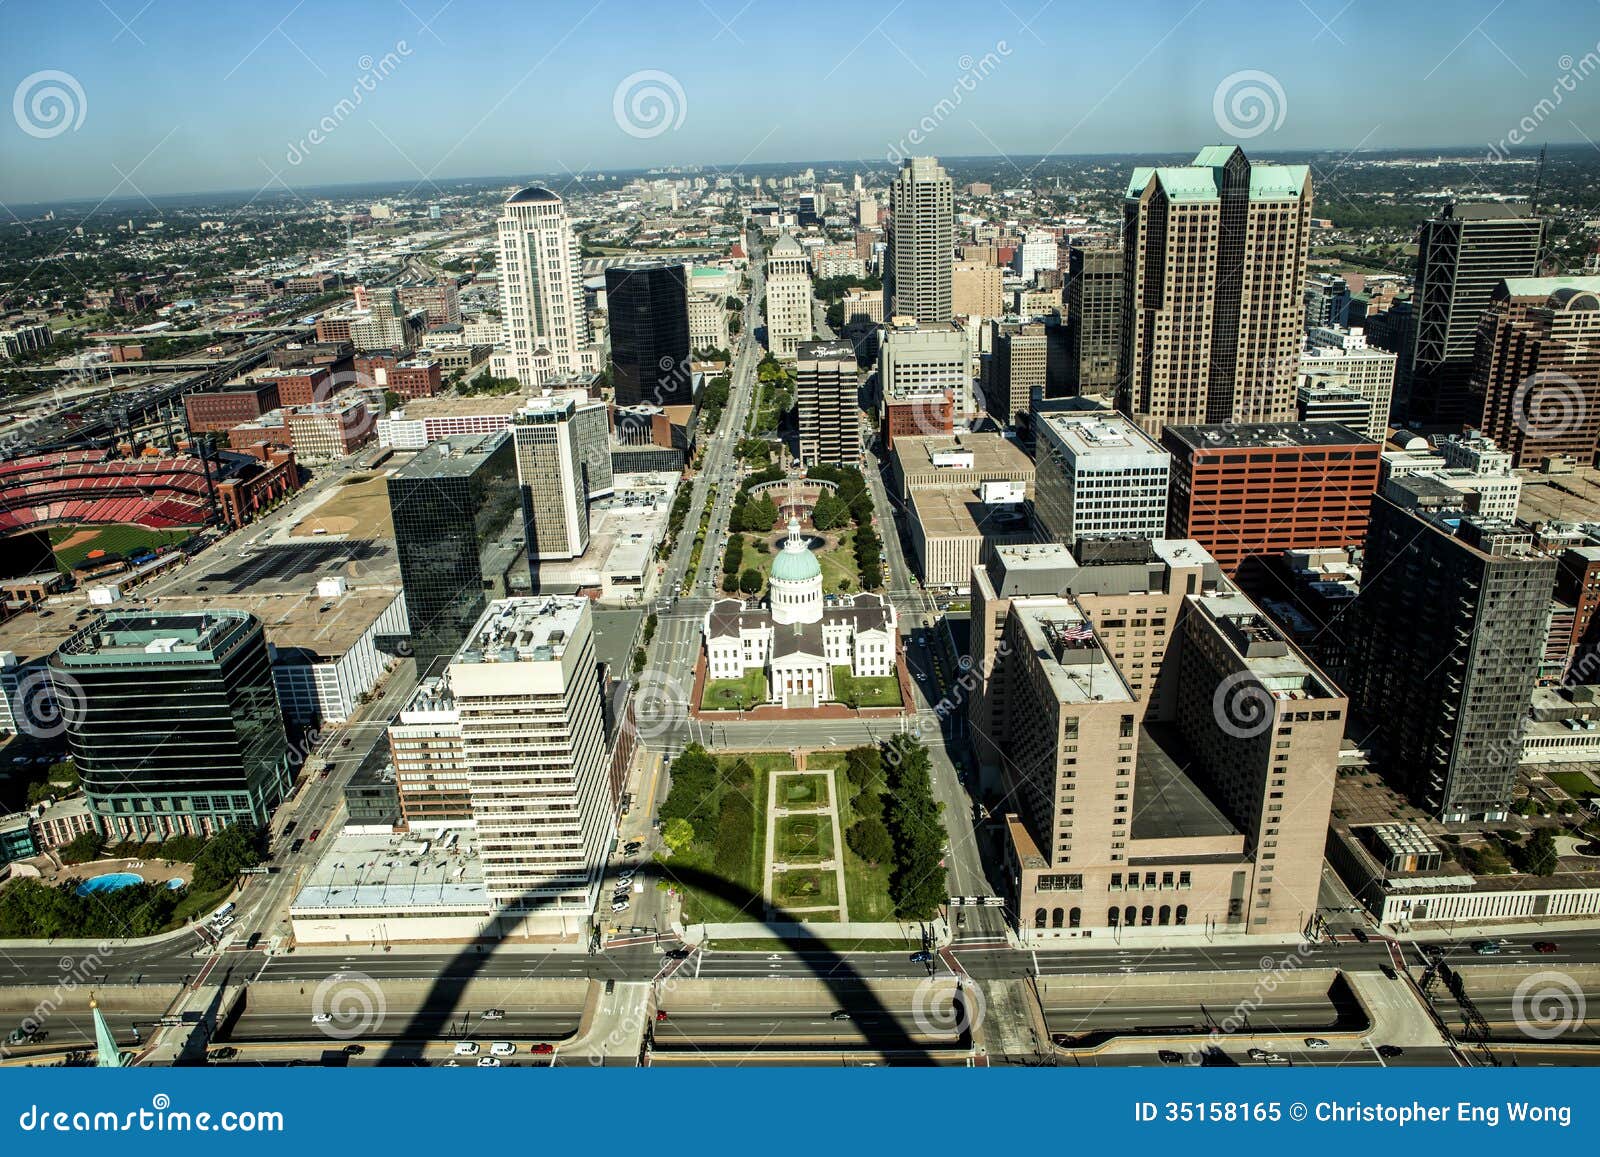 Downtown St. Louis And The Old Court House Royalty Free Stock Photo - Image: 35158165